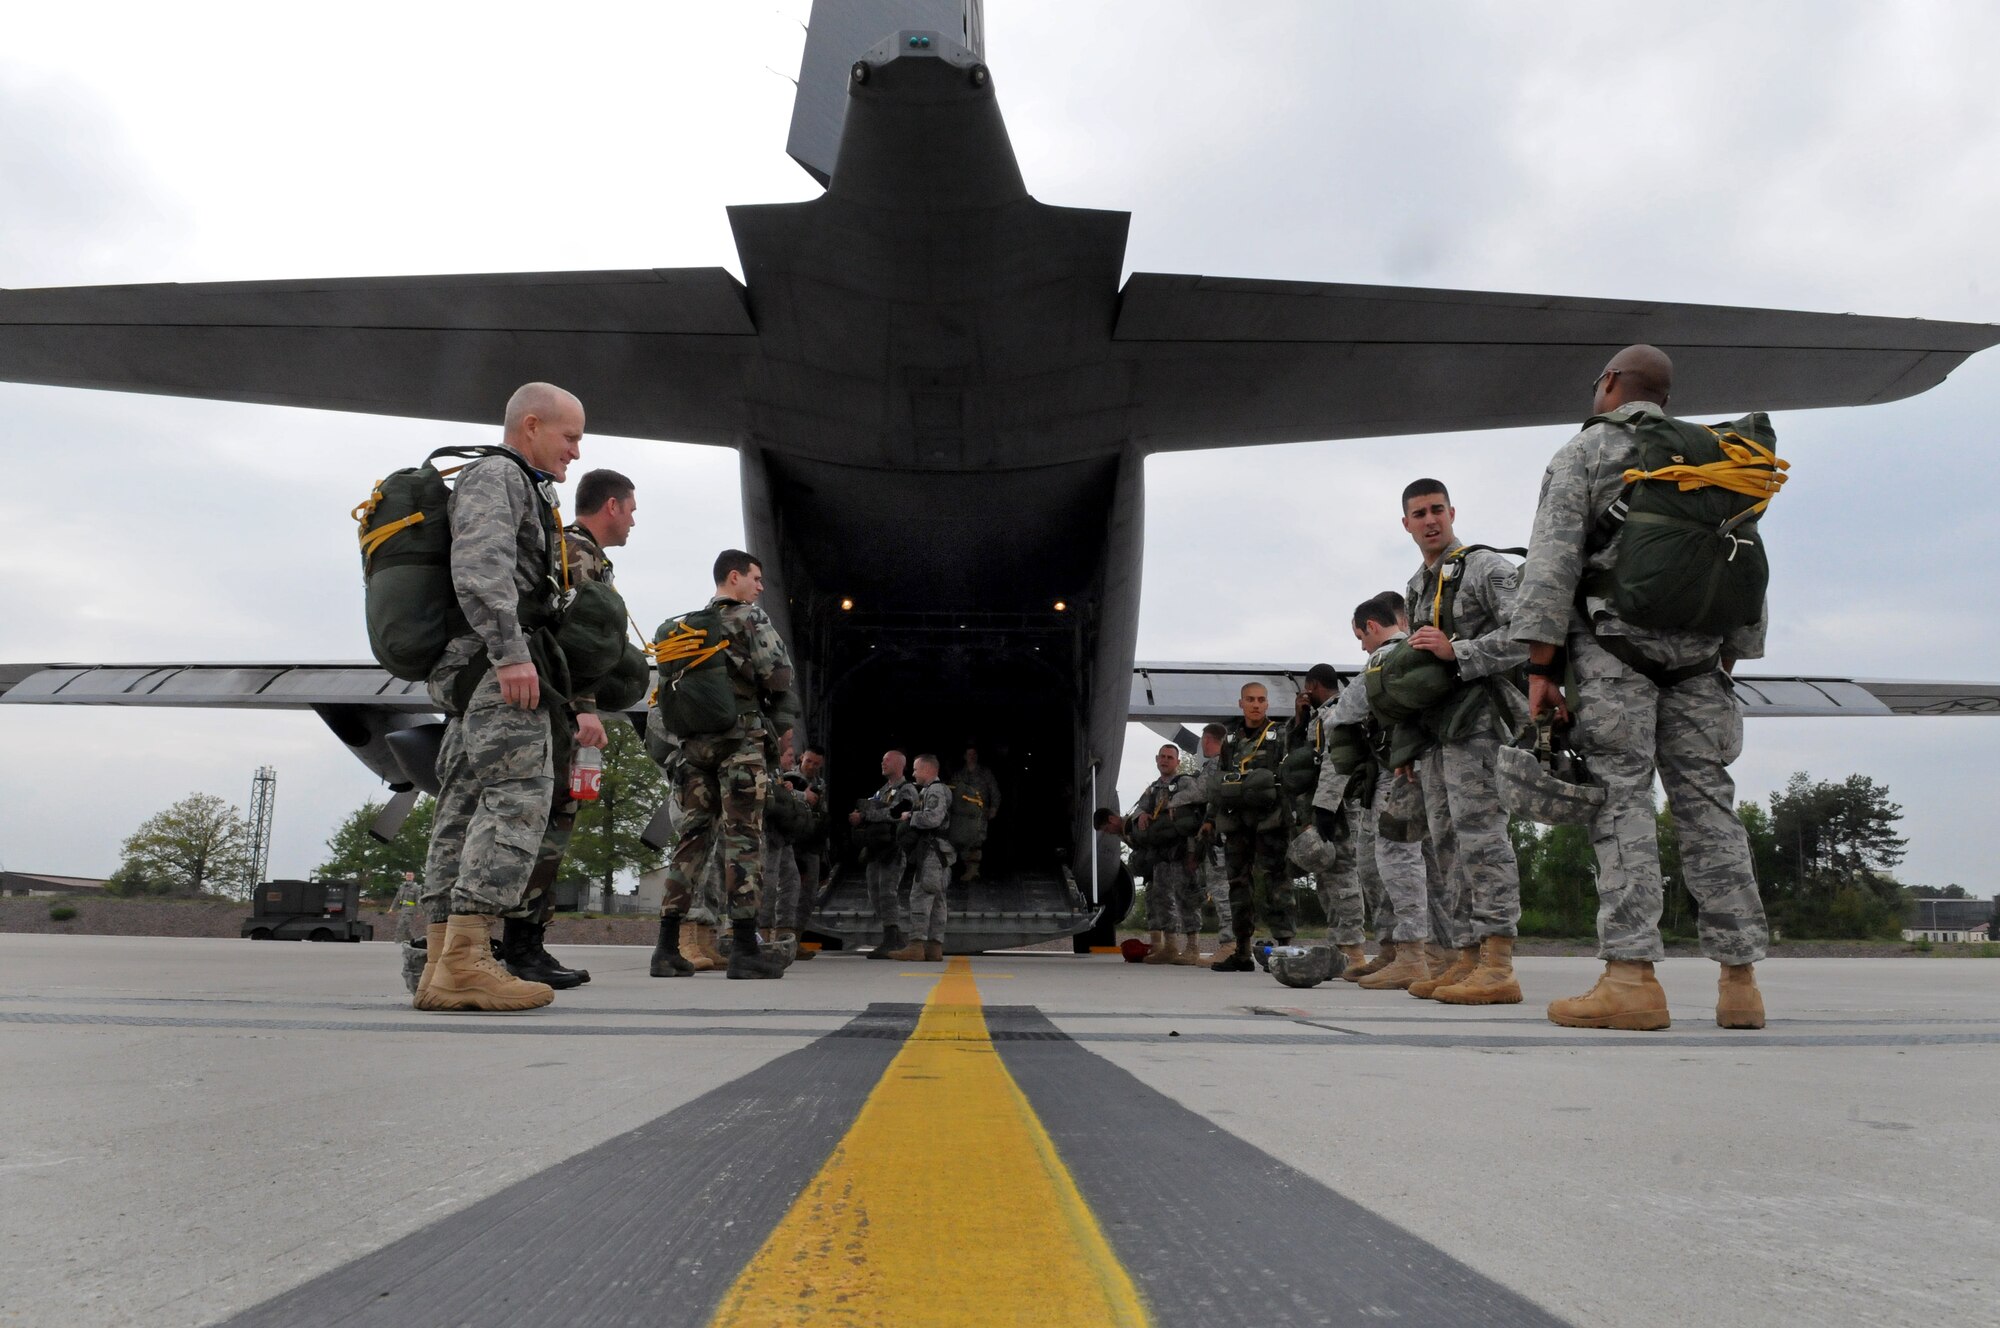 United States Air Force paratroopers wait to board the C-130E Hercules at Ramstein Air Base, Germany, April 30, 2009. The jump was conducted as part of the celebration for the Contingency Readiness Group's 10th anniversary. (U.S. Air Force photo by Airman 1st Class Grovert Fuentes-Contreras)